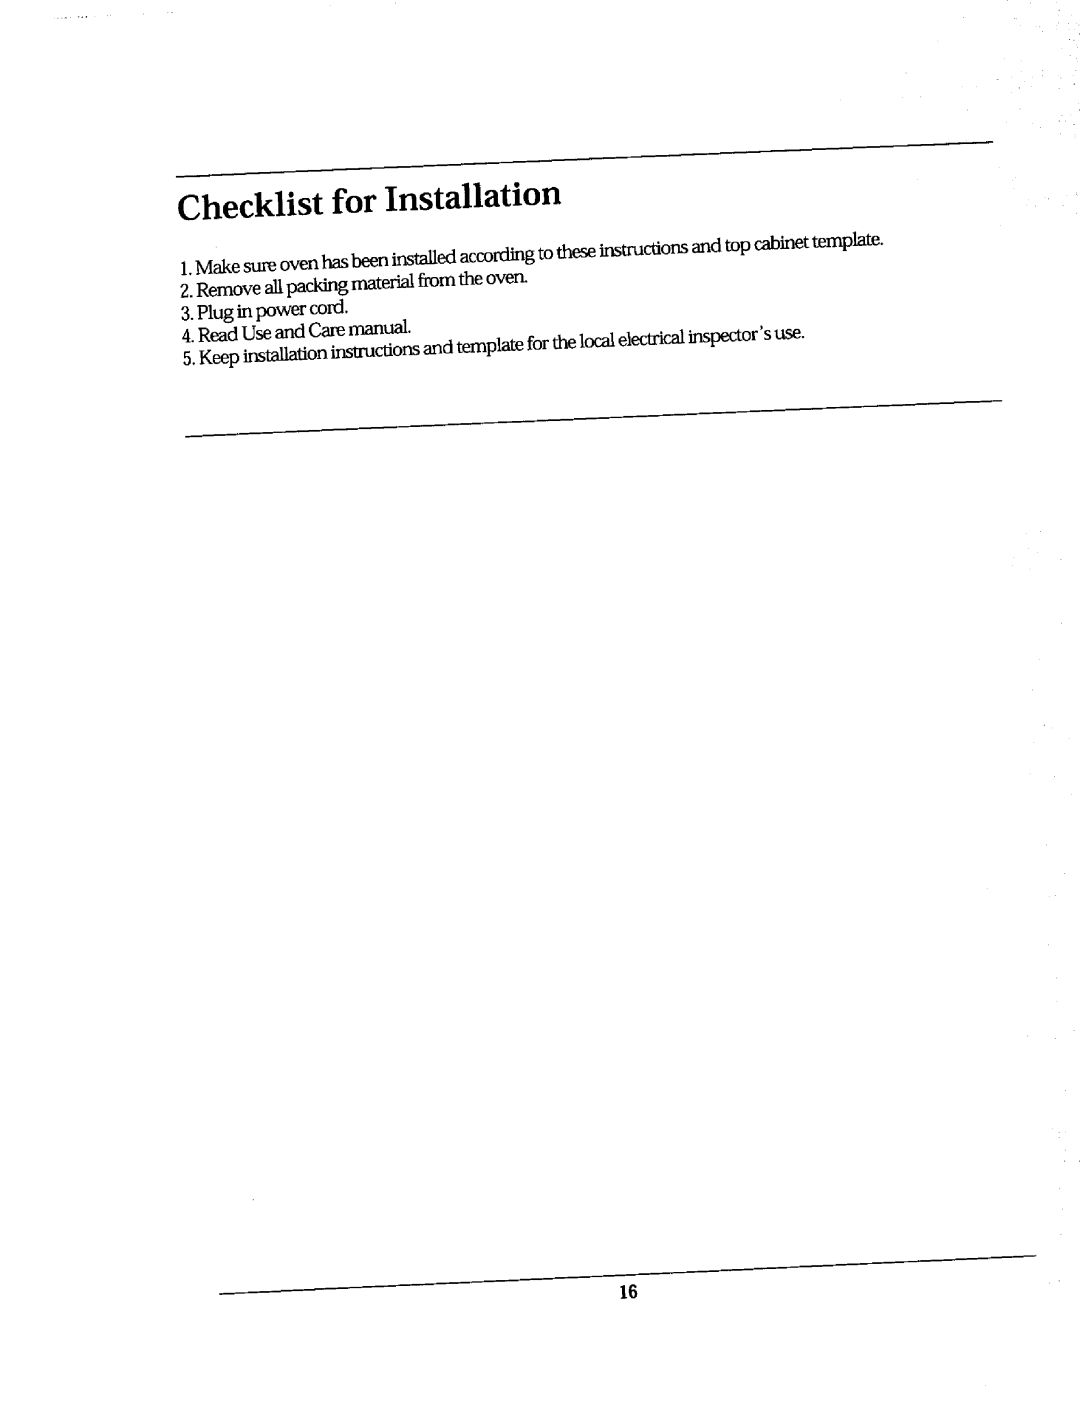 Whirlpool Ni-l30 manual Checklist for Installation, Remove all packing material from the oven 